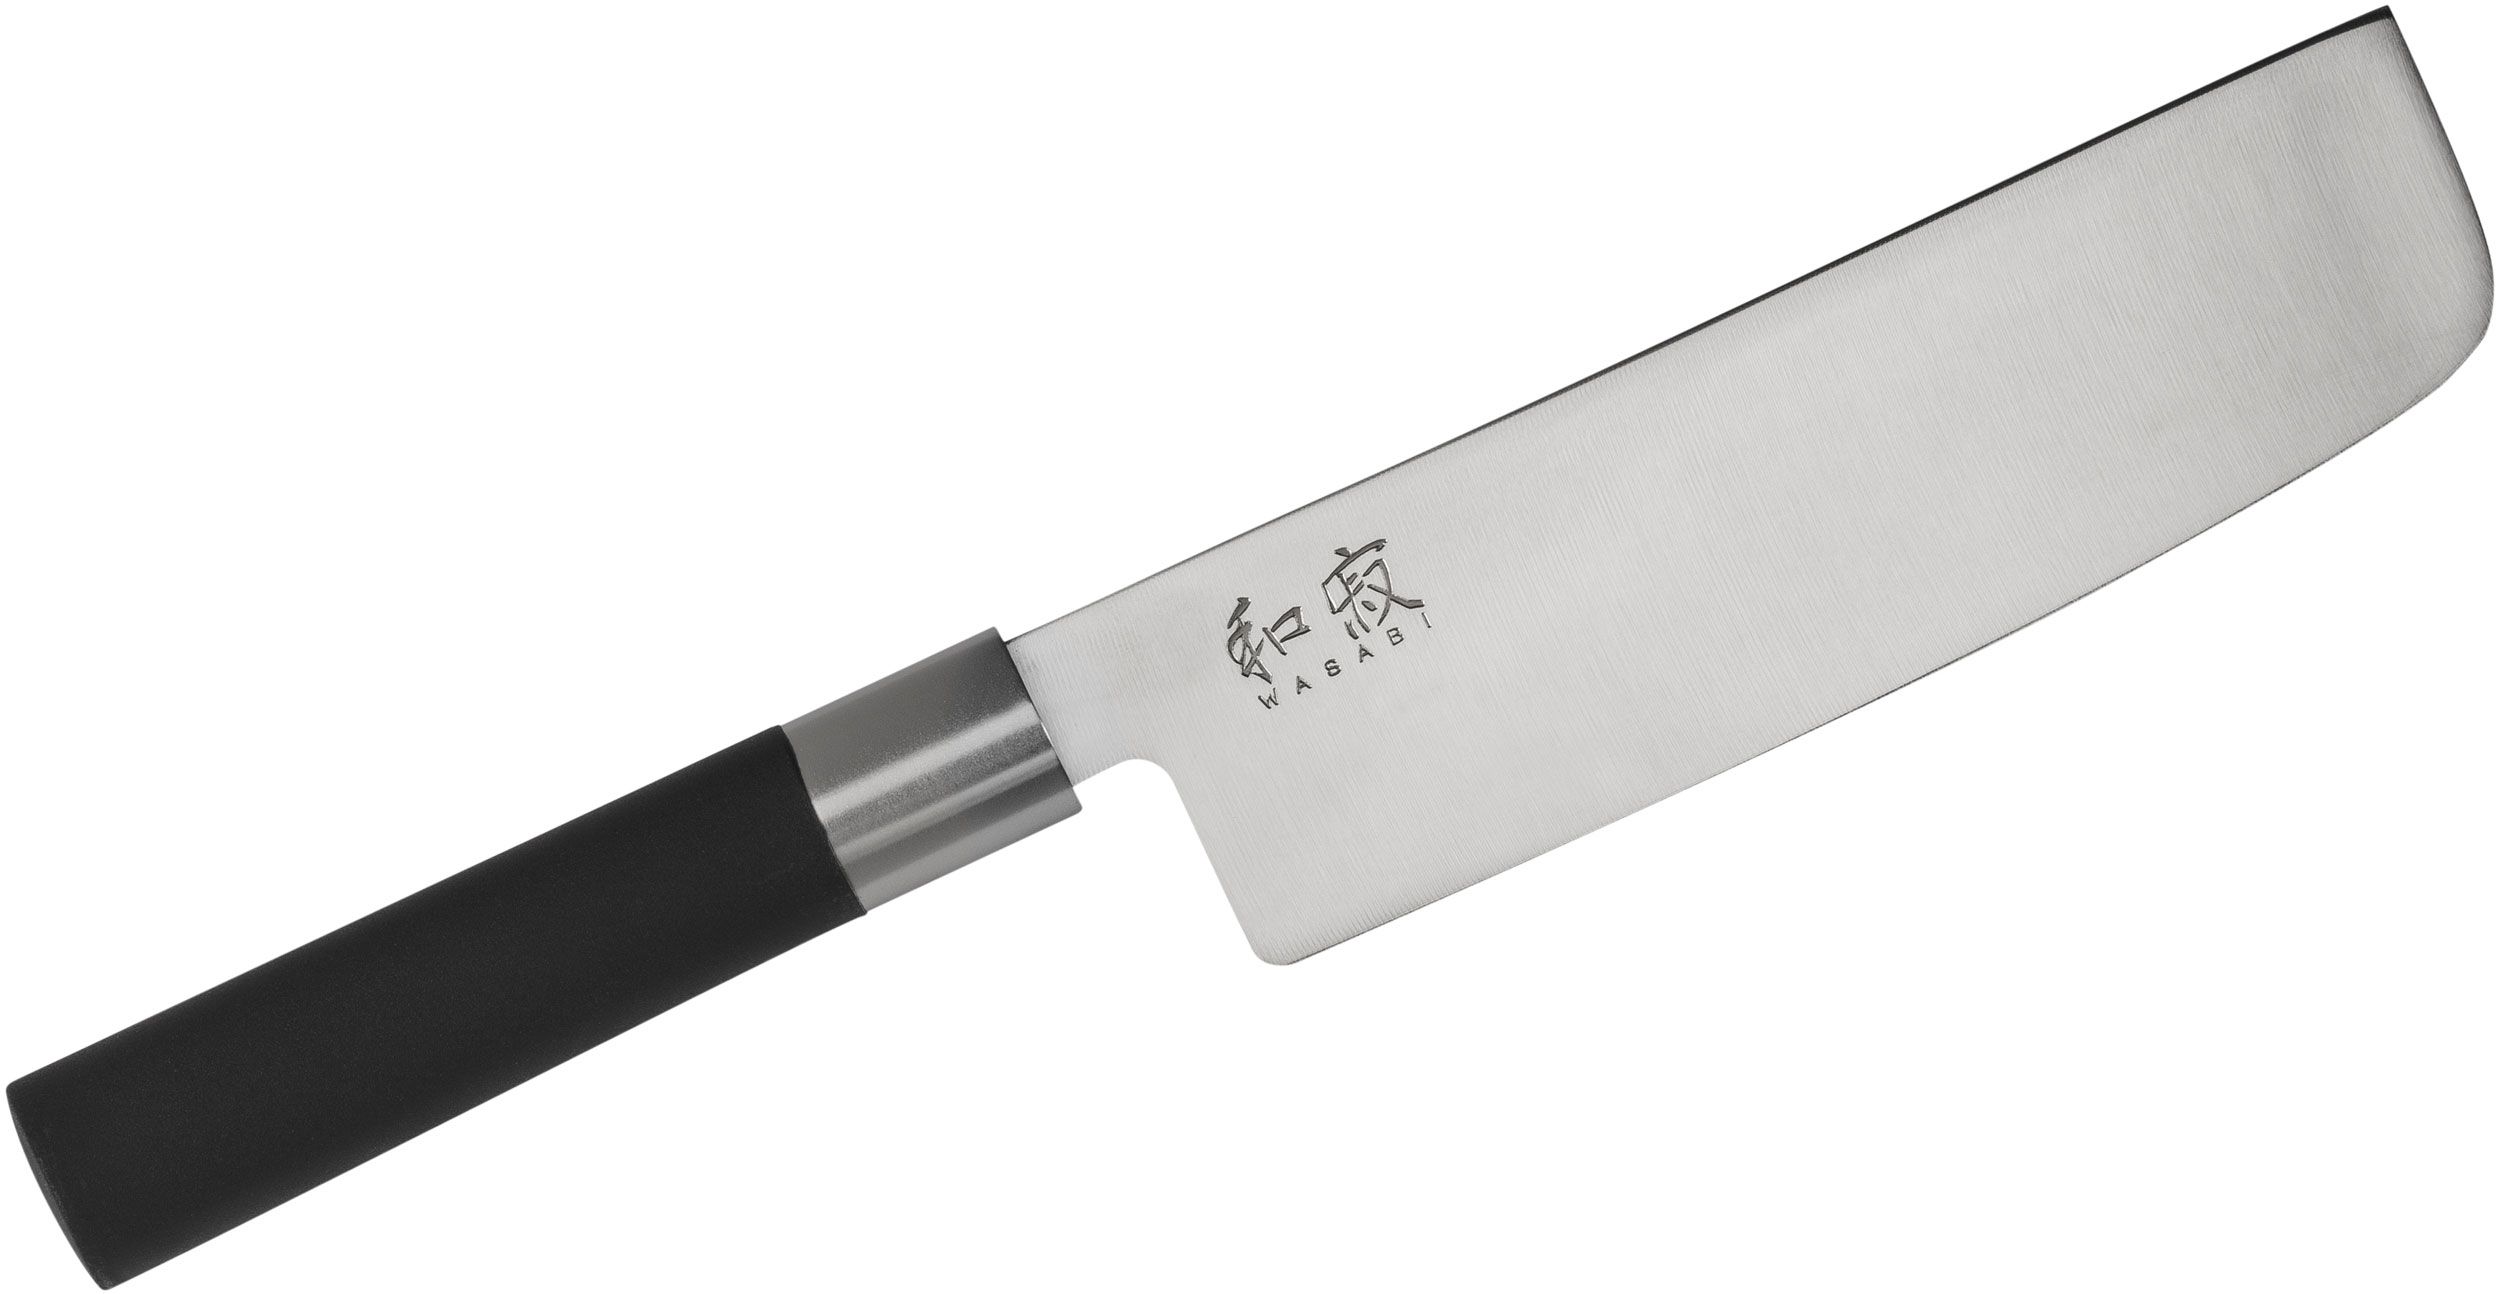 WASABI Knives with its statement Sharpness for better cooking